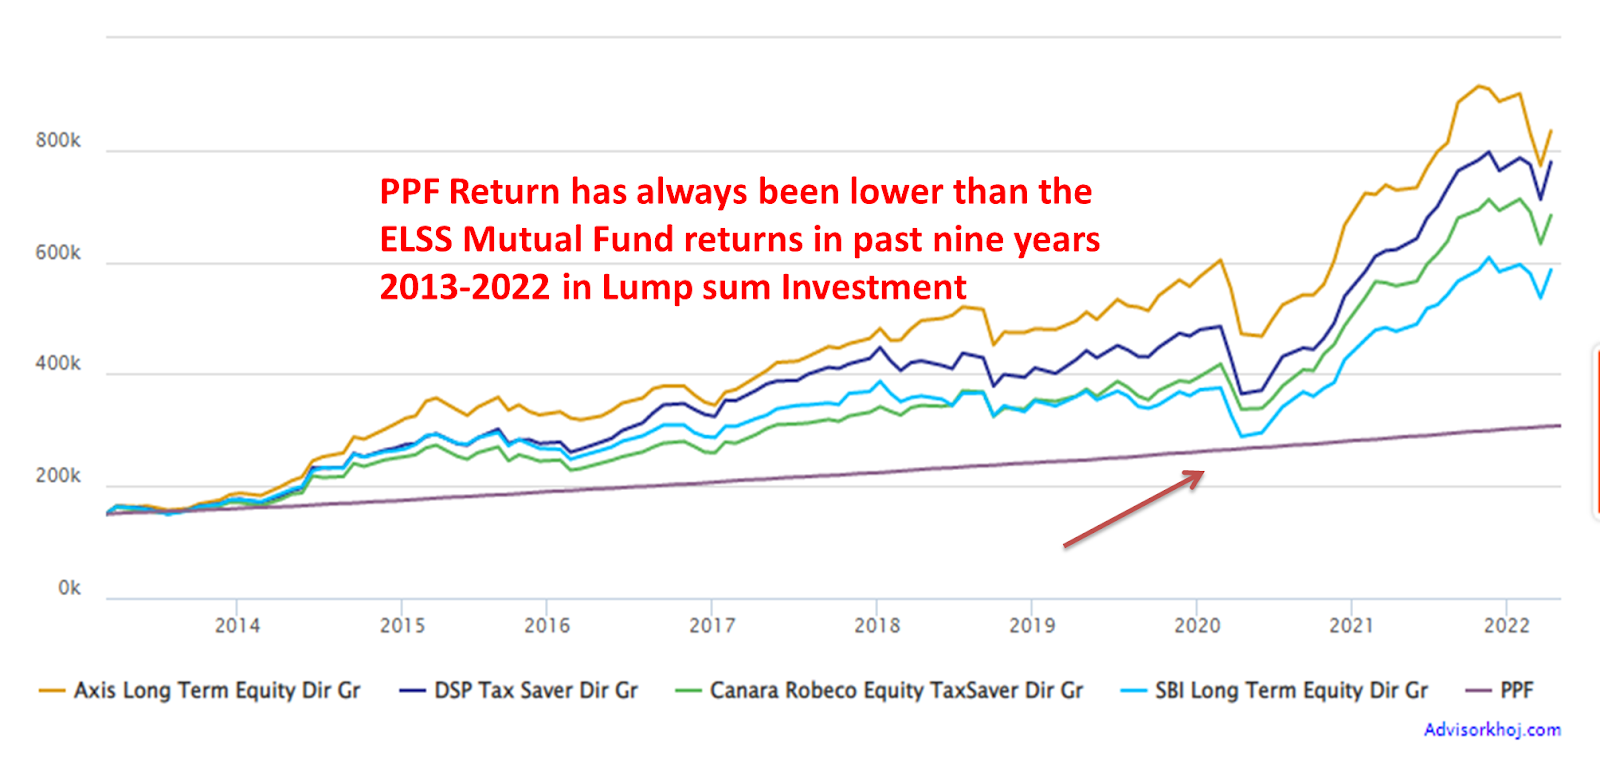 This image compares the performance of four ELSS funds Vs PPF in a lump sum investment mode